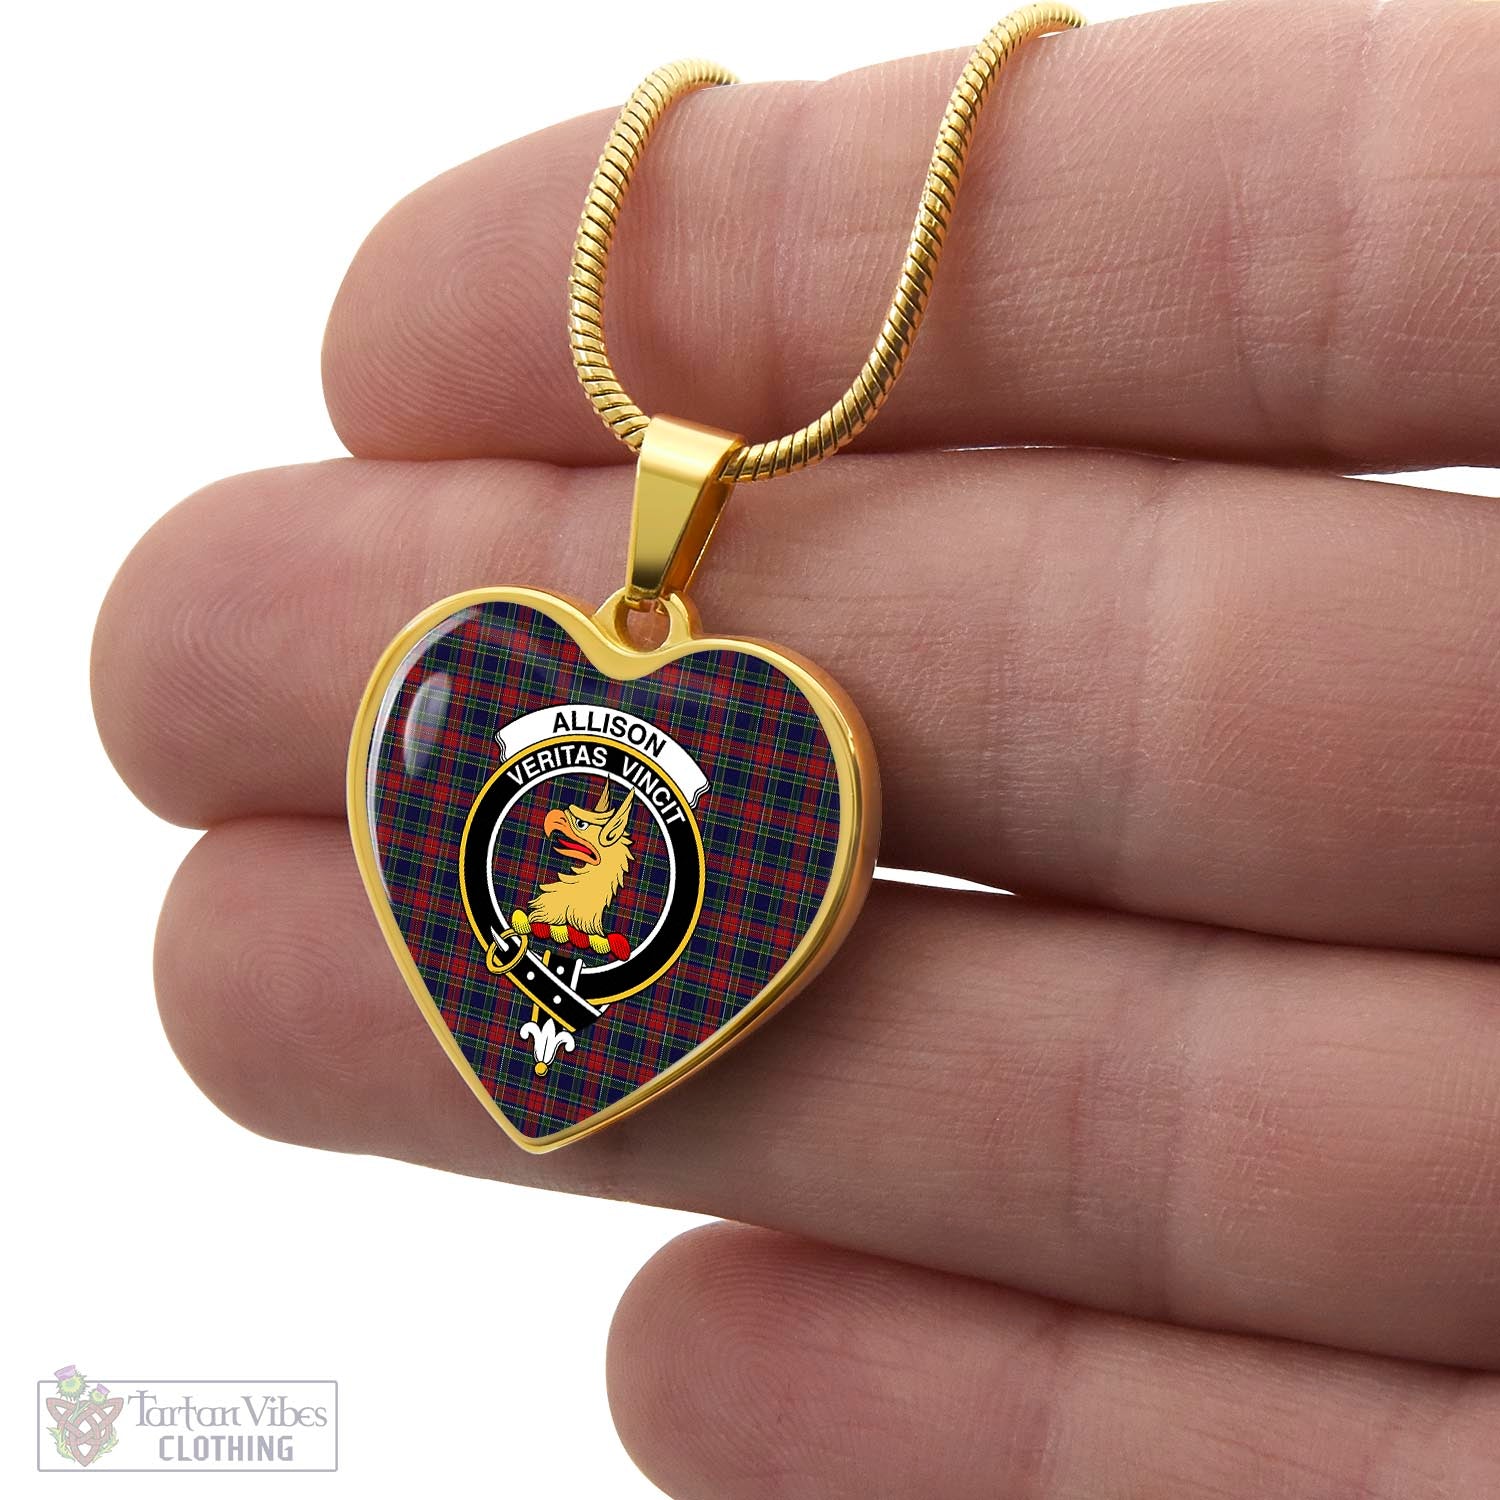 Tartan Vibes Clothing Allison Red Tartan Heart Necklace with Family Crest